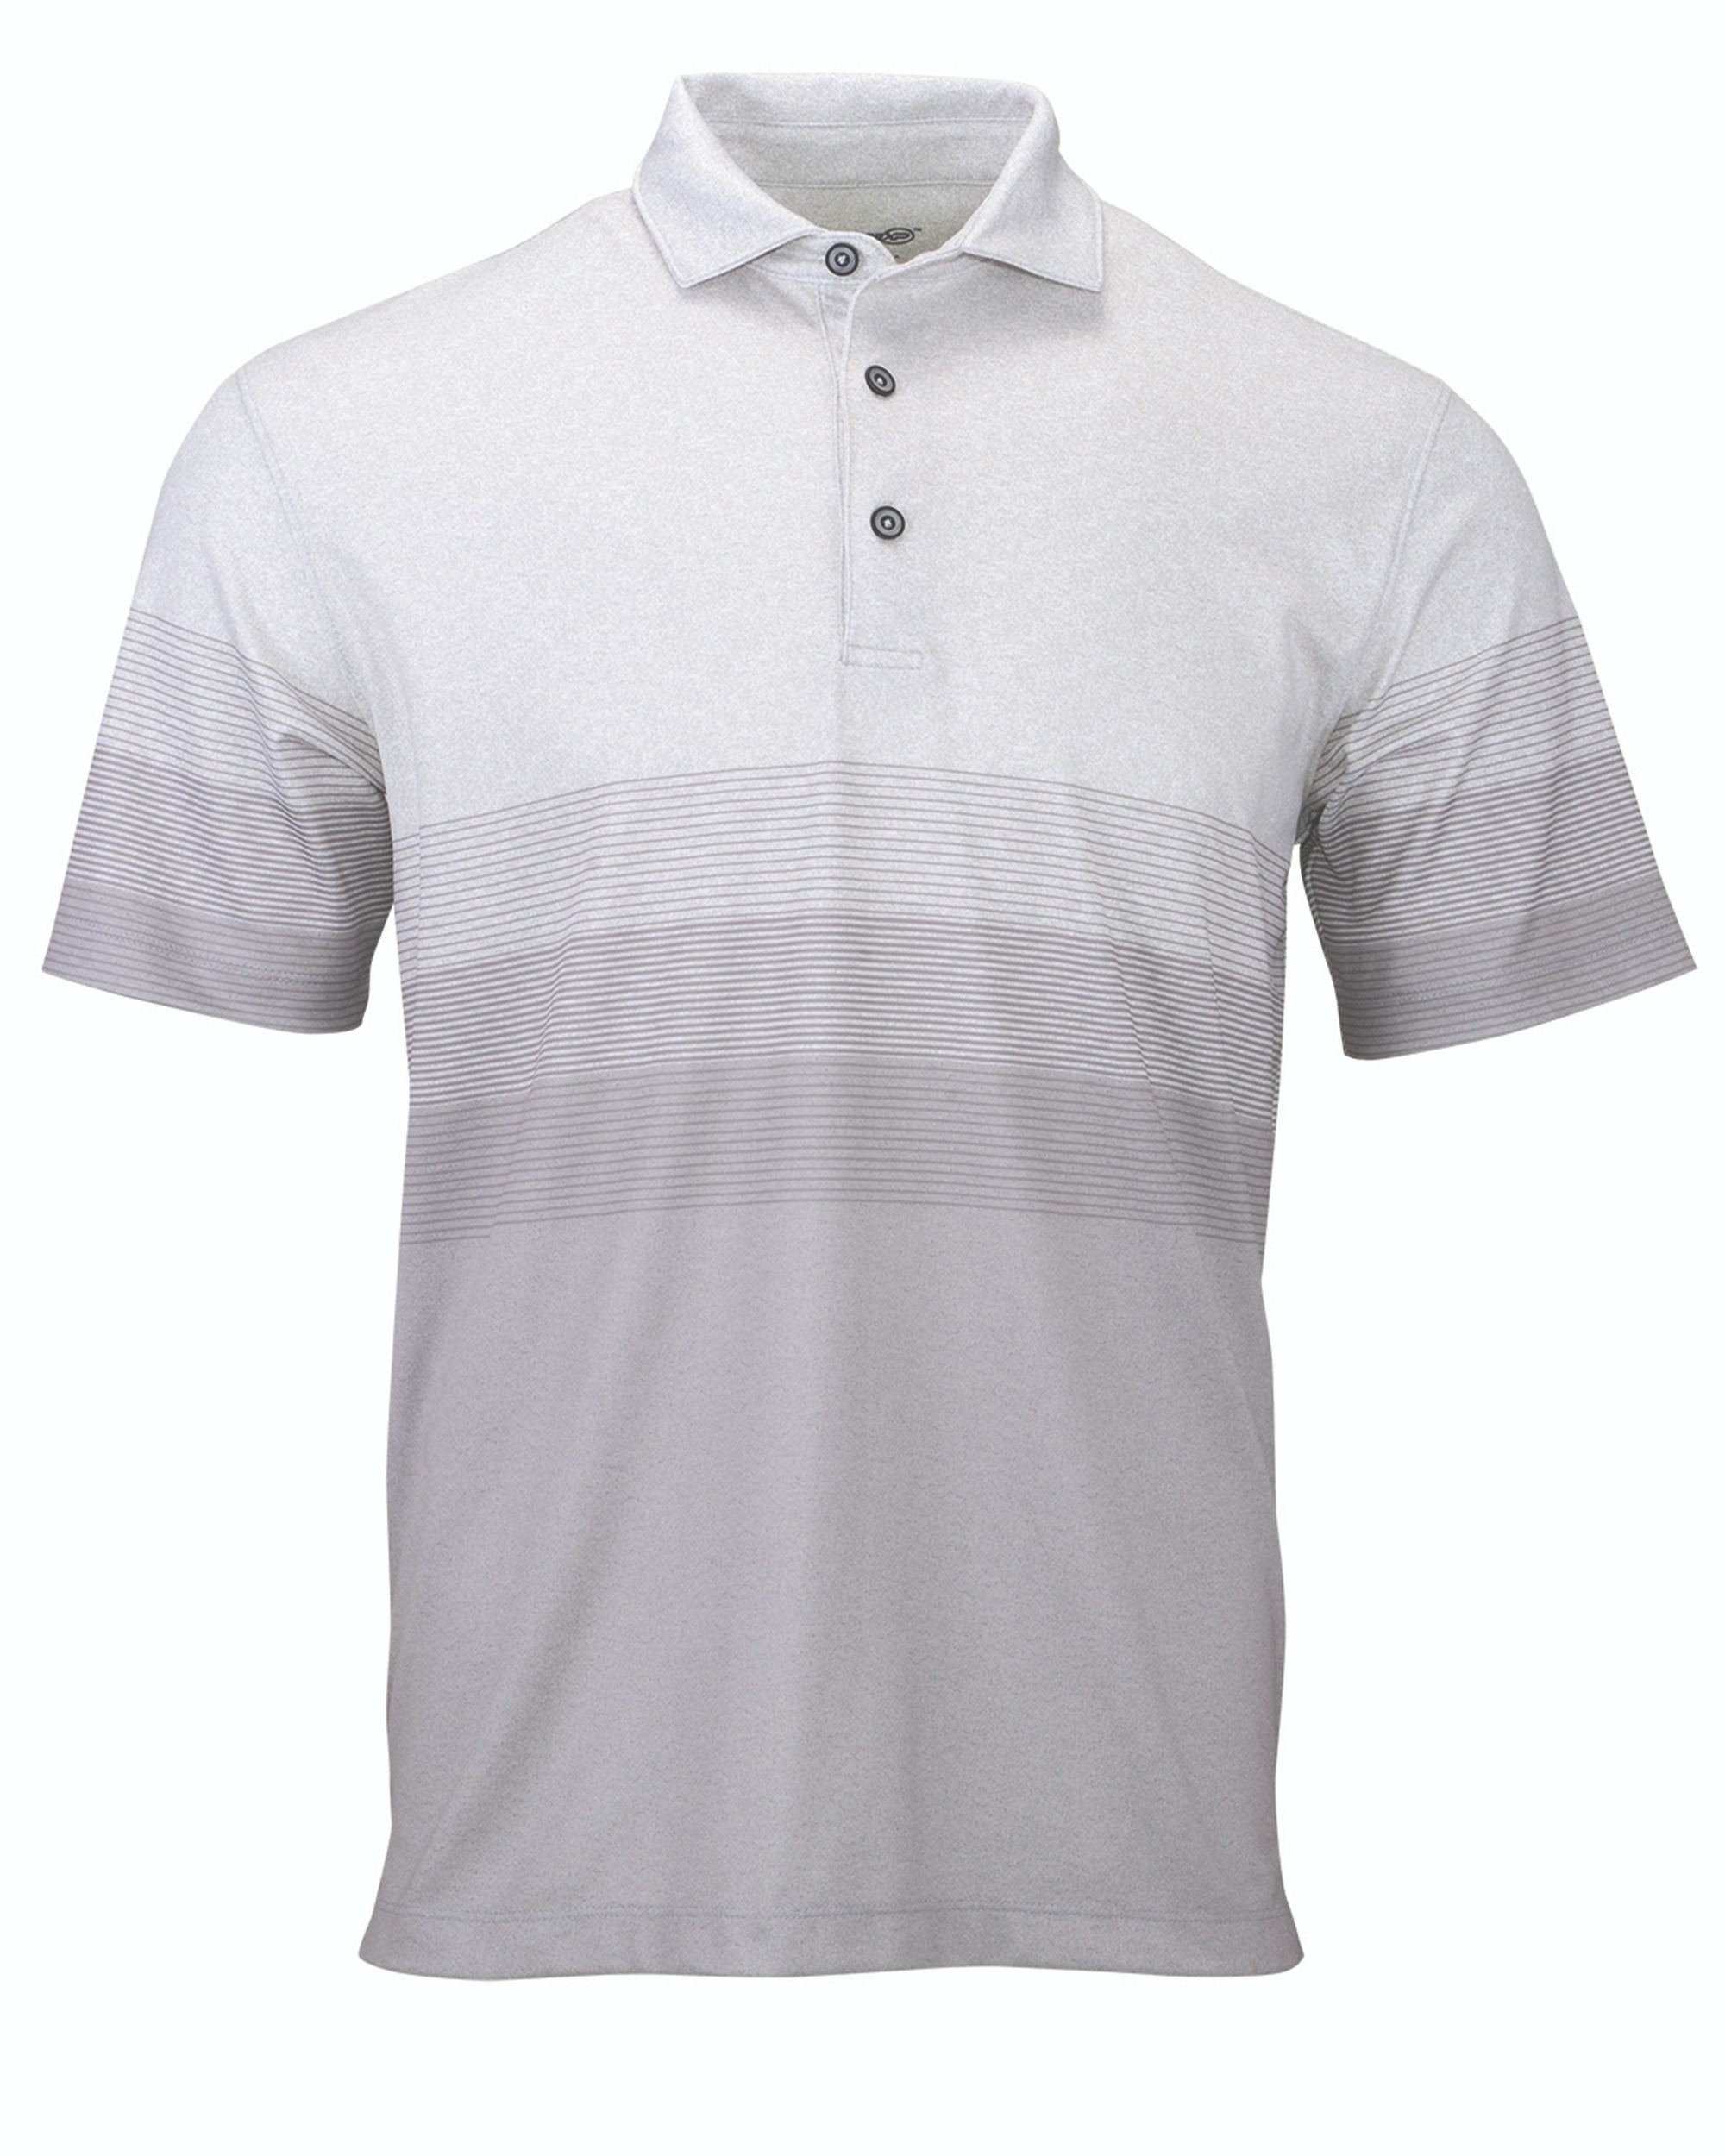 Paragon® 153 Belmont Striped Sublimated Polo